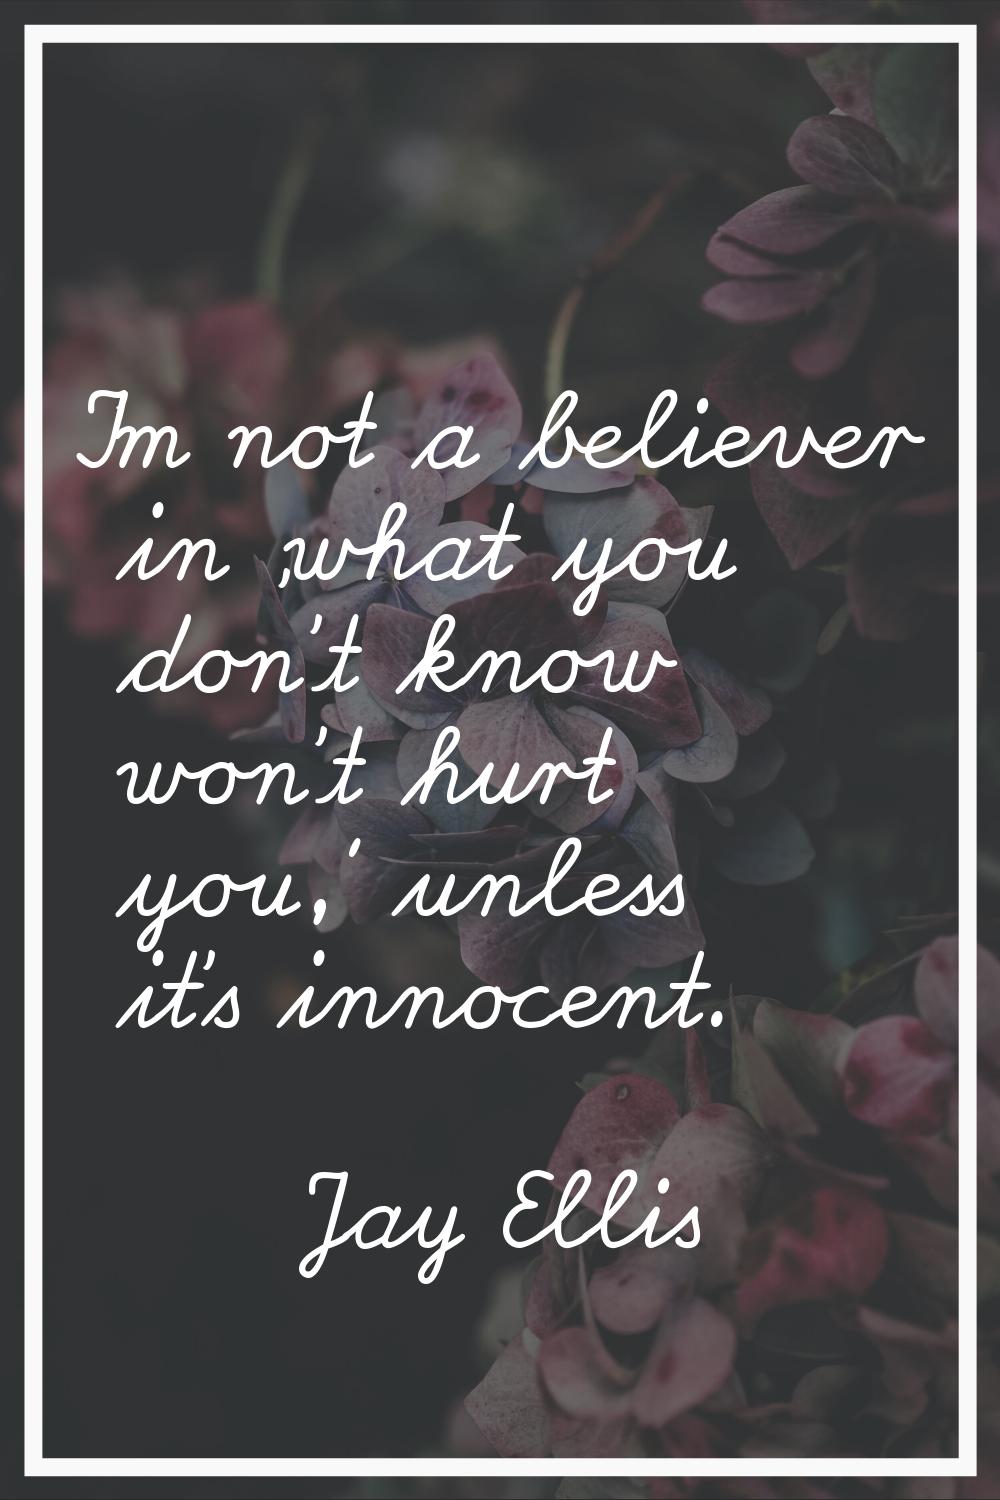 I'm not a believer in 'what you don't know won't hurt you,' unless it's innocent.